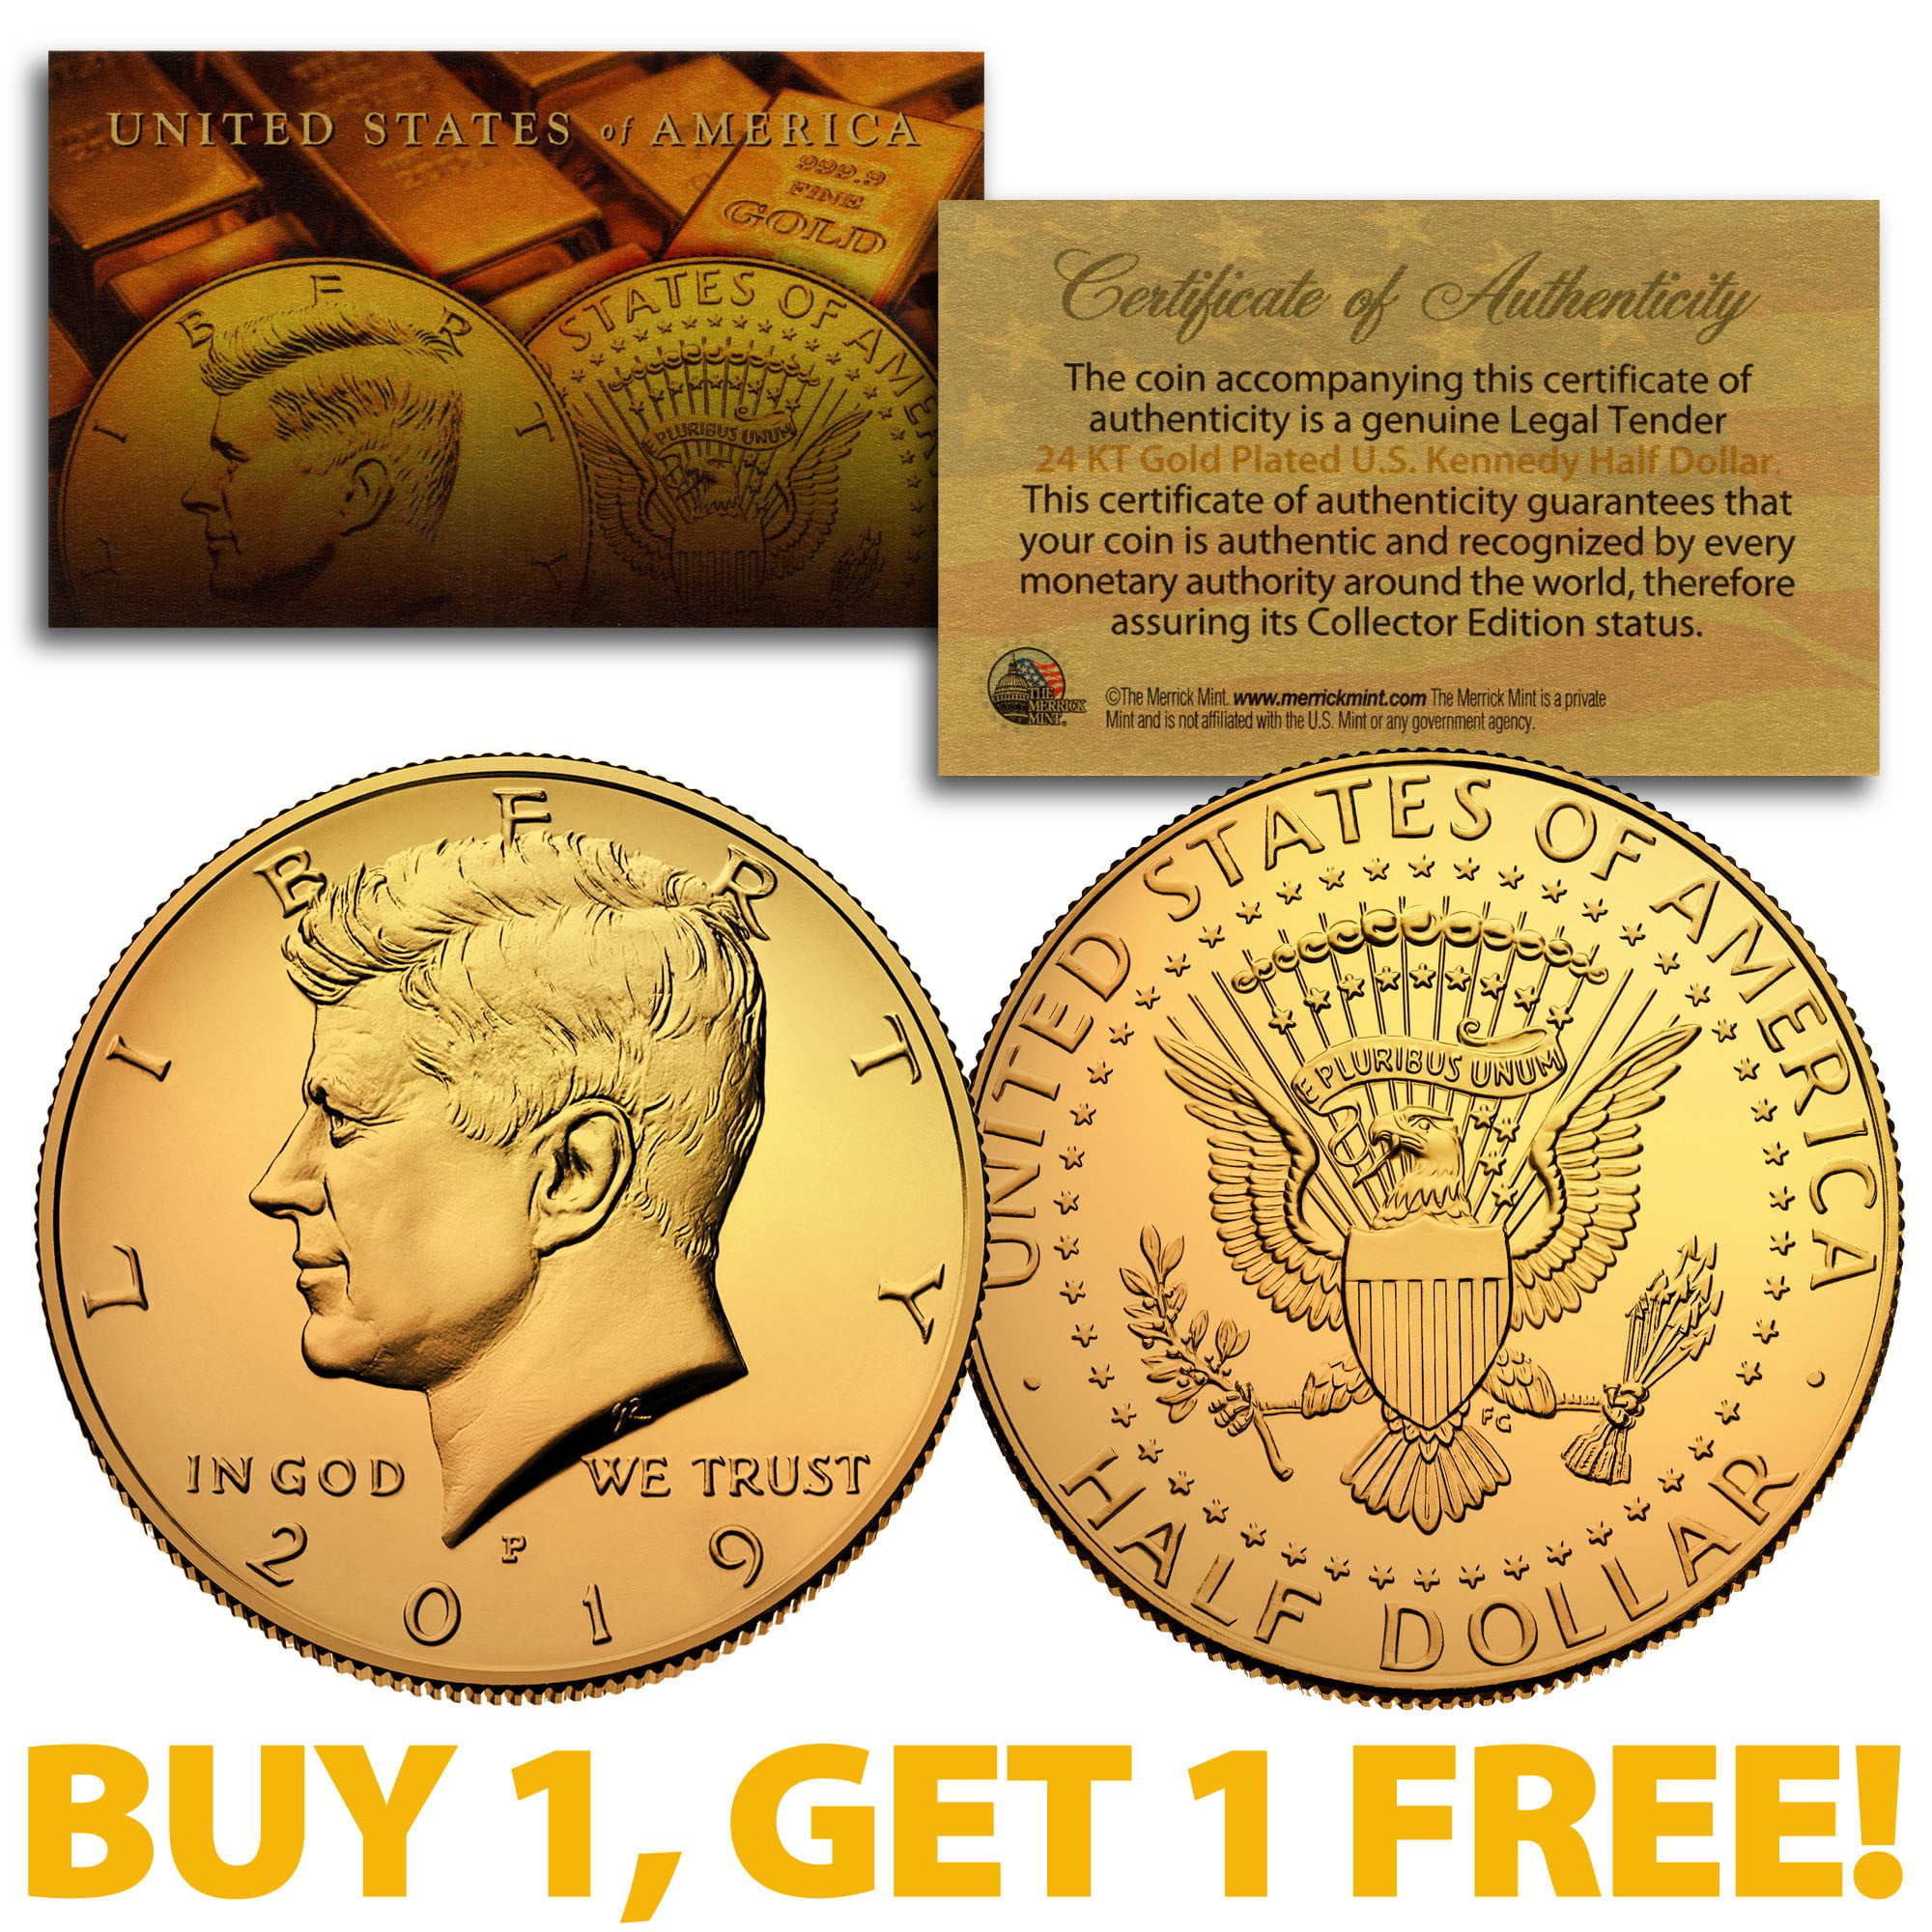 20 COIN SET EACH IN HOLDER LOT OF 20-24 KT GOLD PLATED J.F KENNEDY 50 CENT 